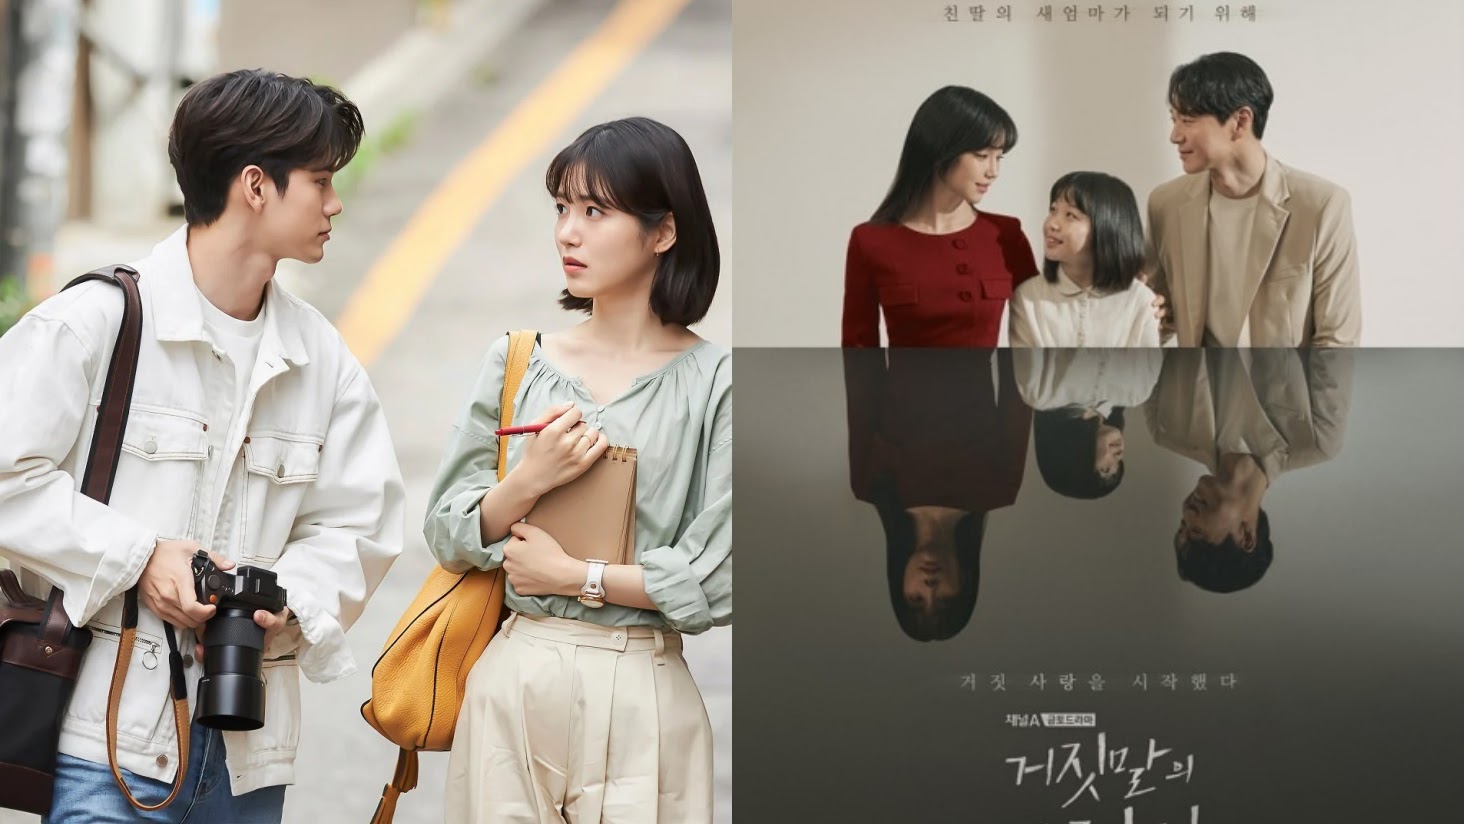 Recent Episodes of “More Than Friends” and “Lie After Lie” Reach The Highest Ratings